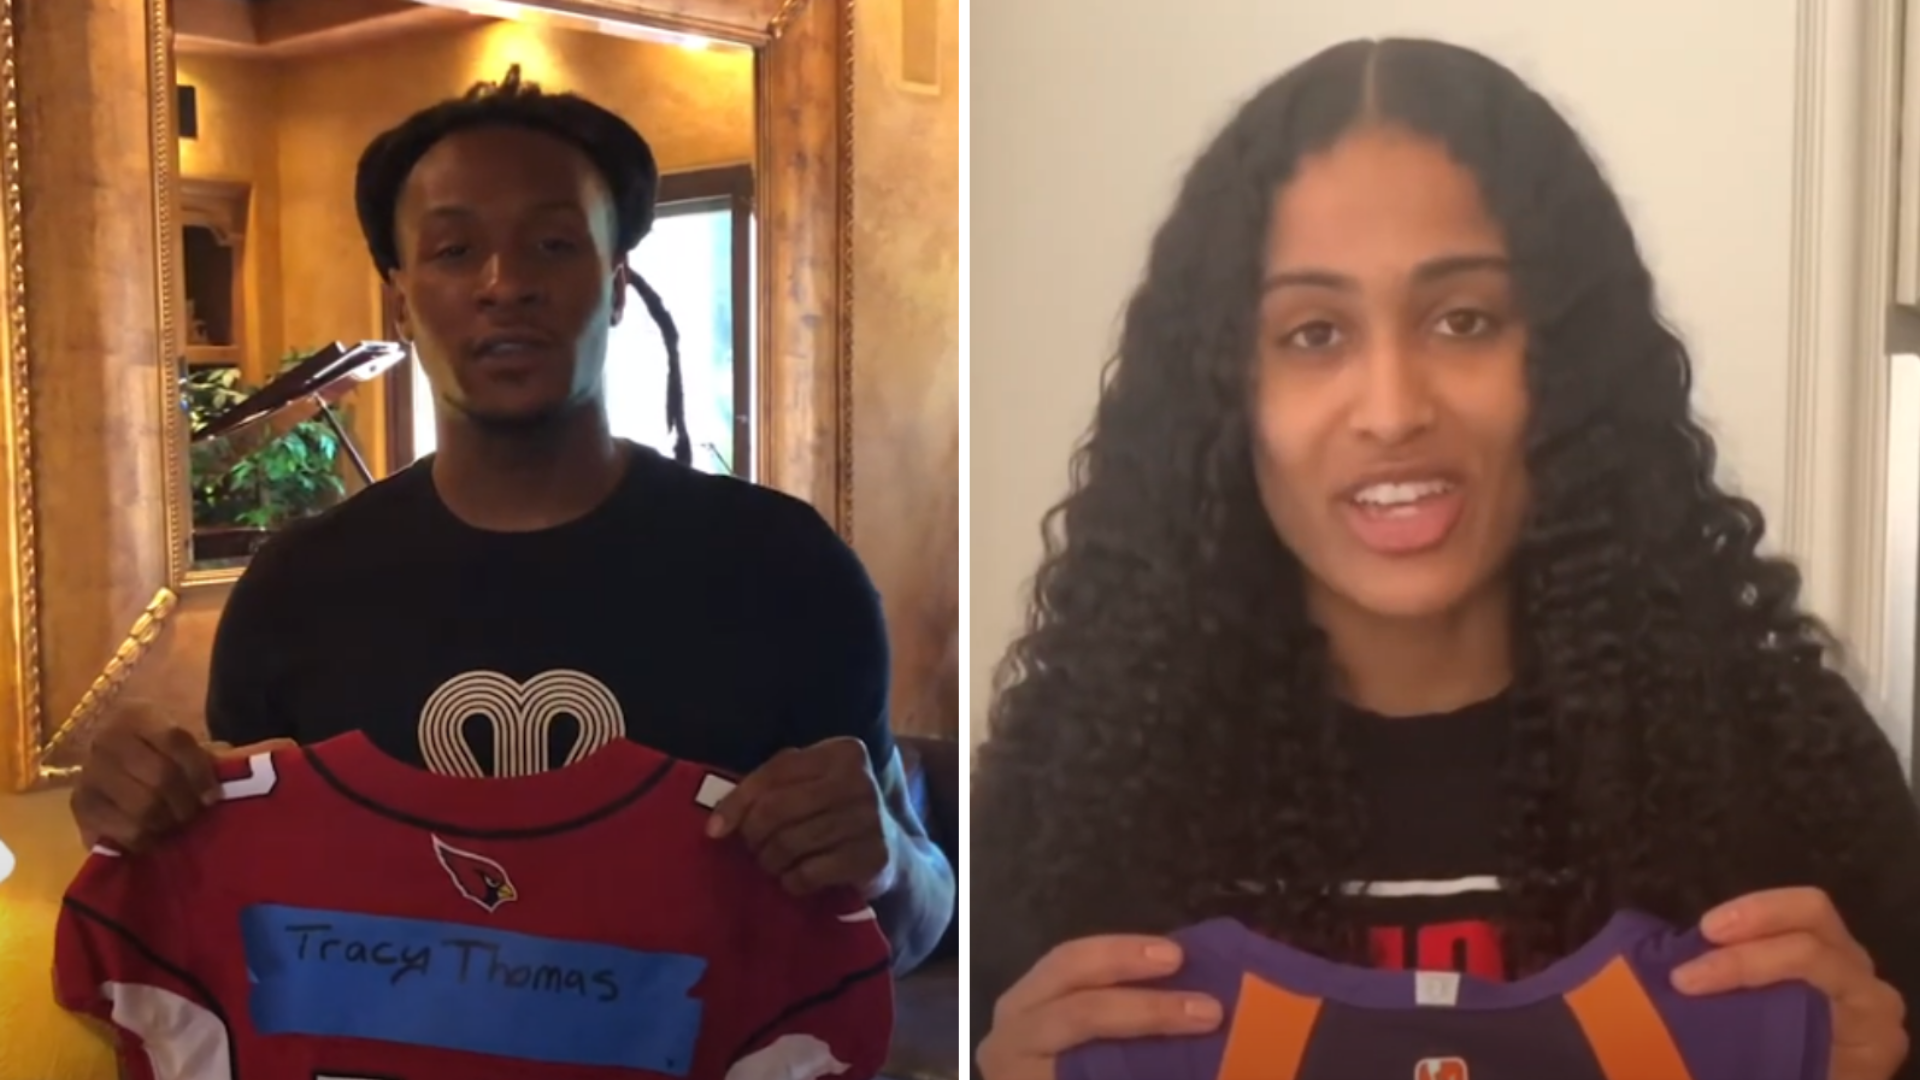 For National Nurses Day, DeAndre Hopkins and Skylar Diggins recognized two Phoenix nurses in a national project by athletes.